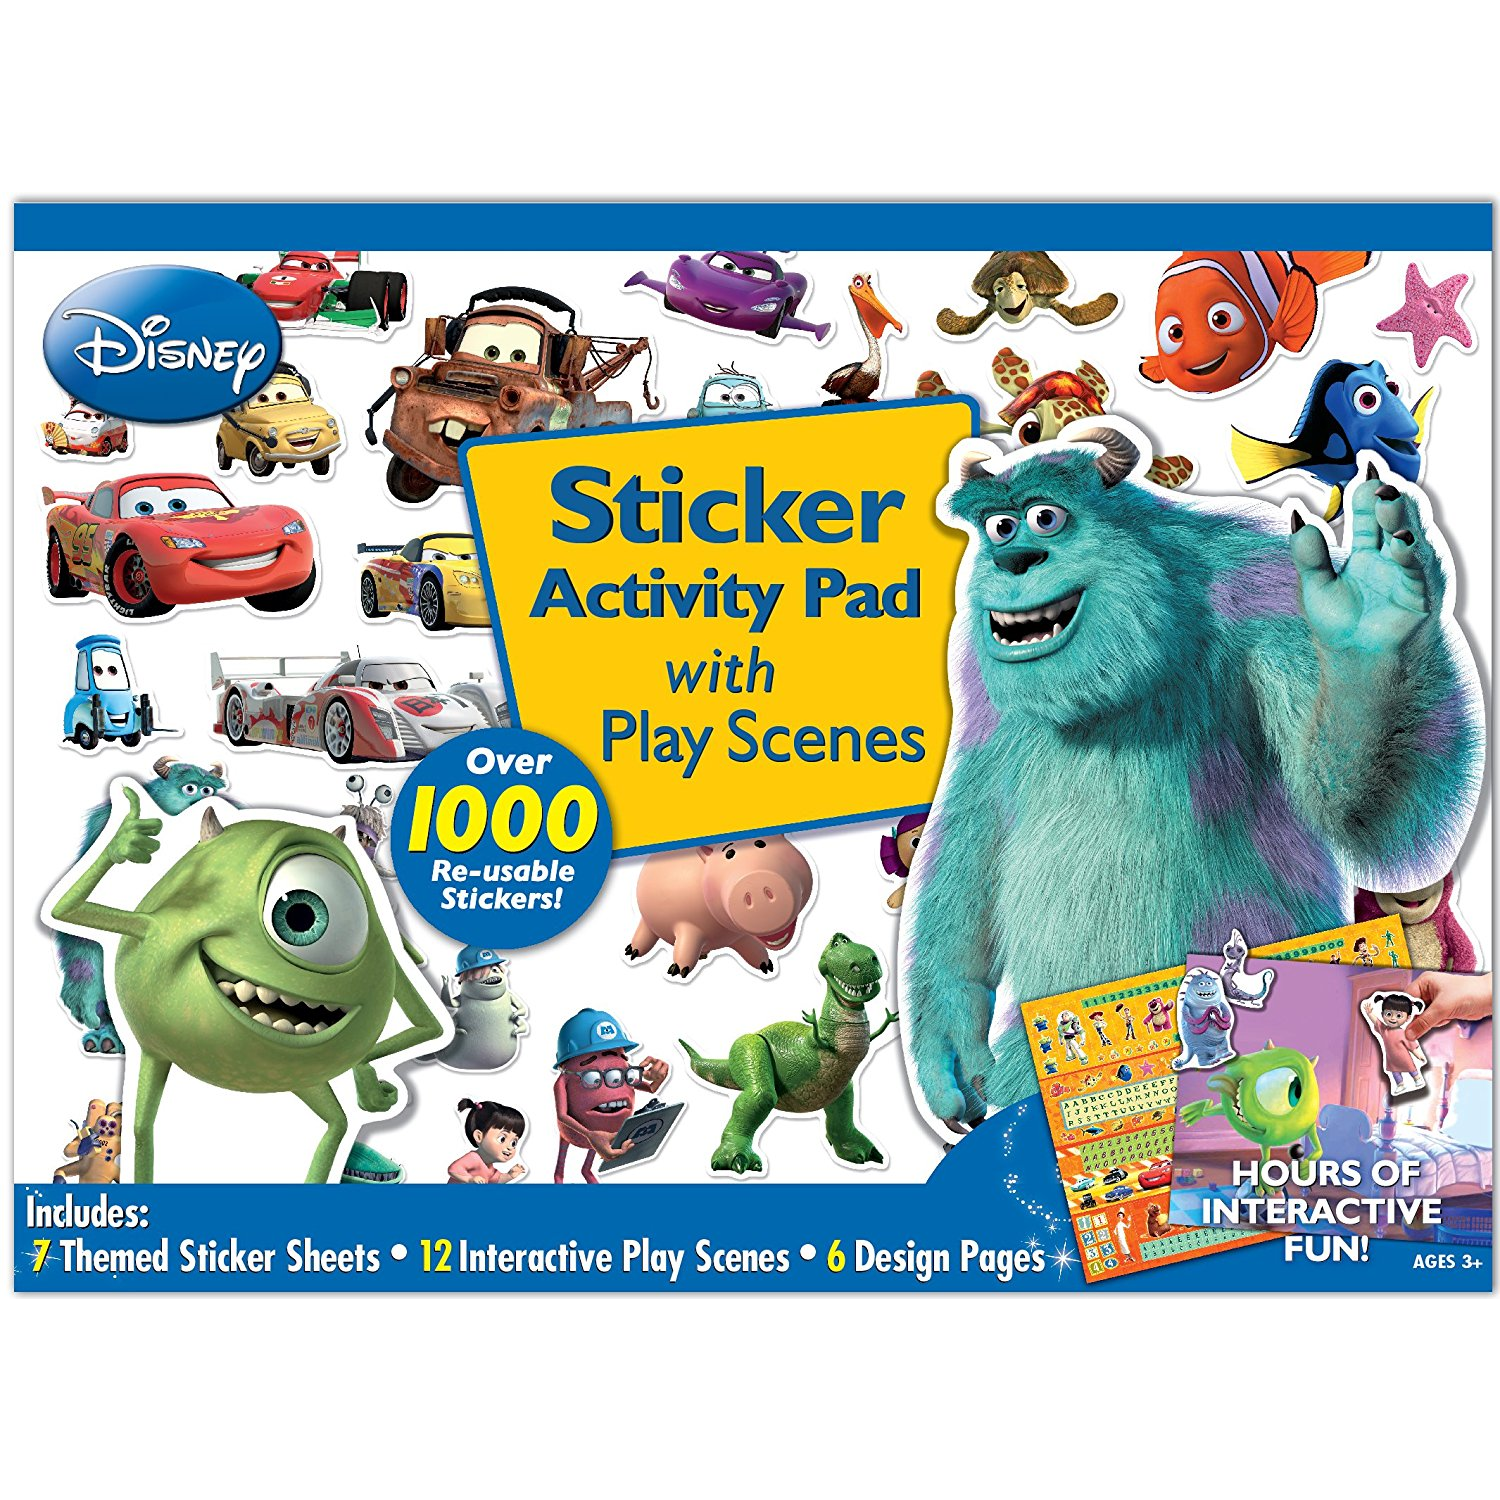 Bendon Disney Pixar’s Monsters Inc Ultimate Sticker Activity Pad Only $6.75! (Add-On Item)